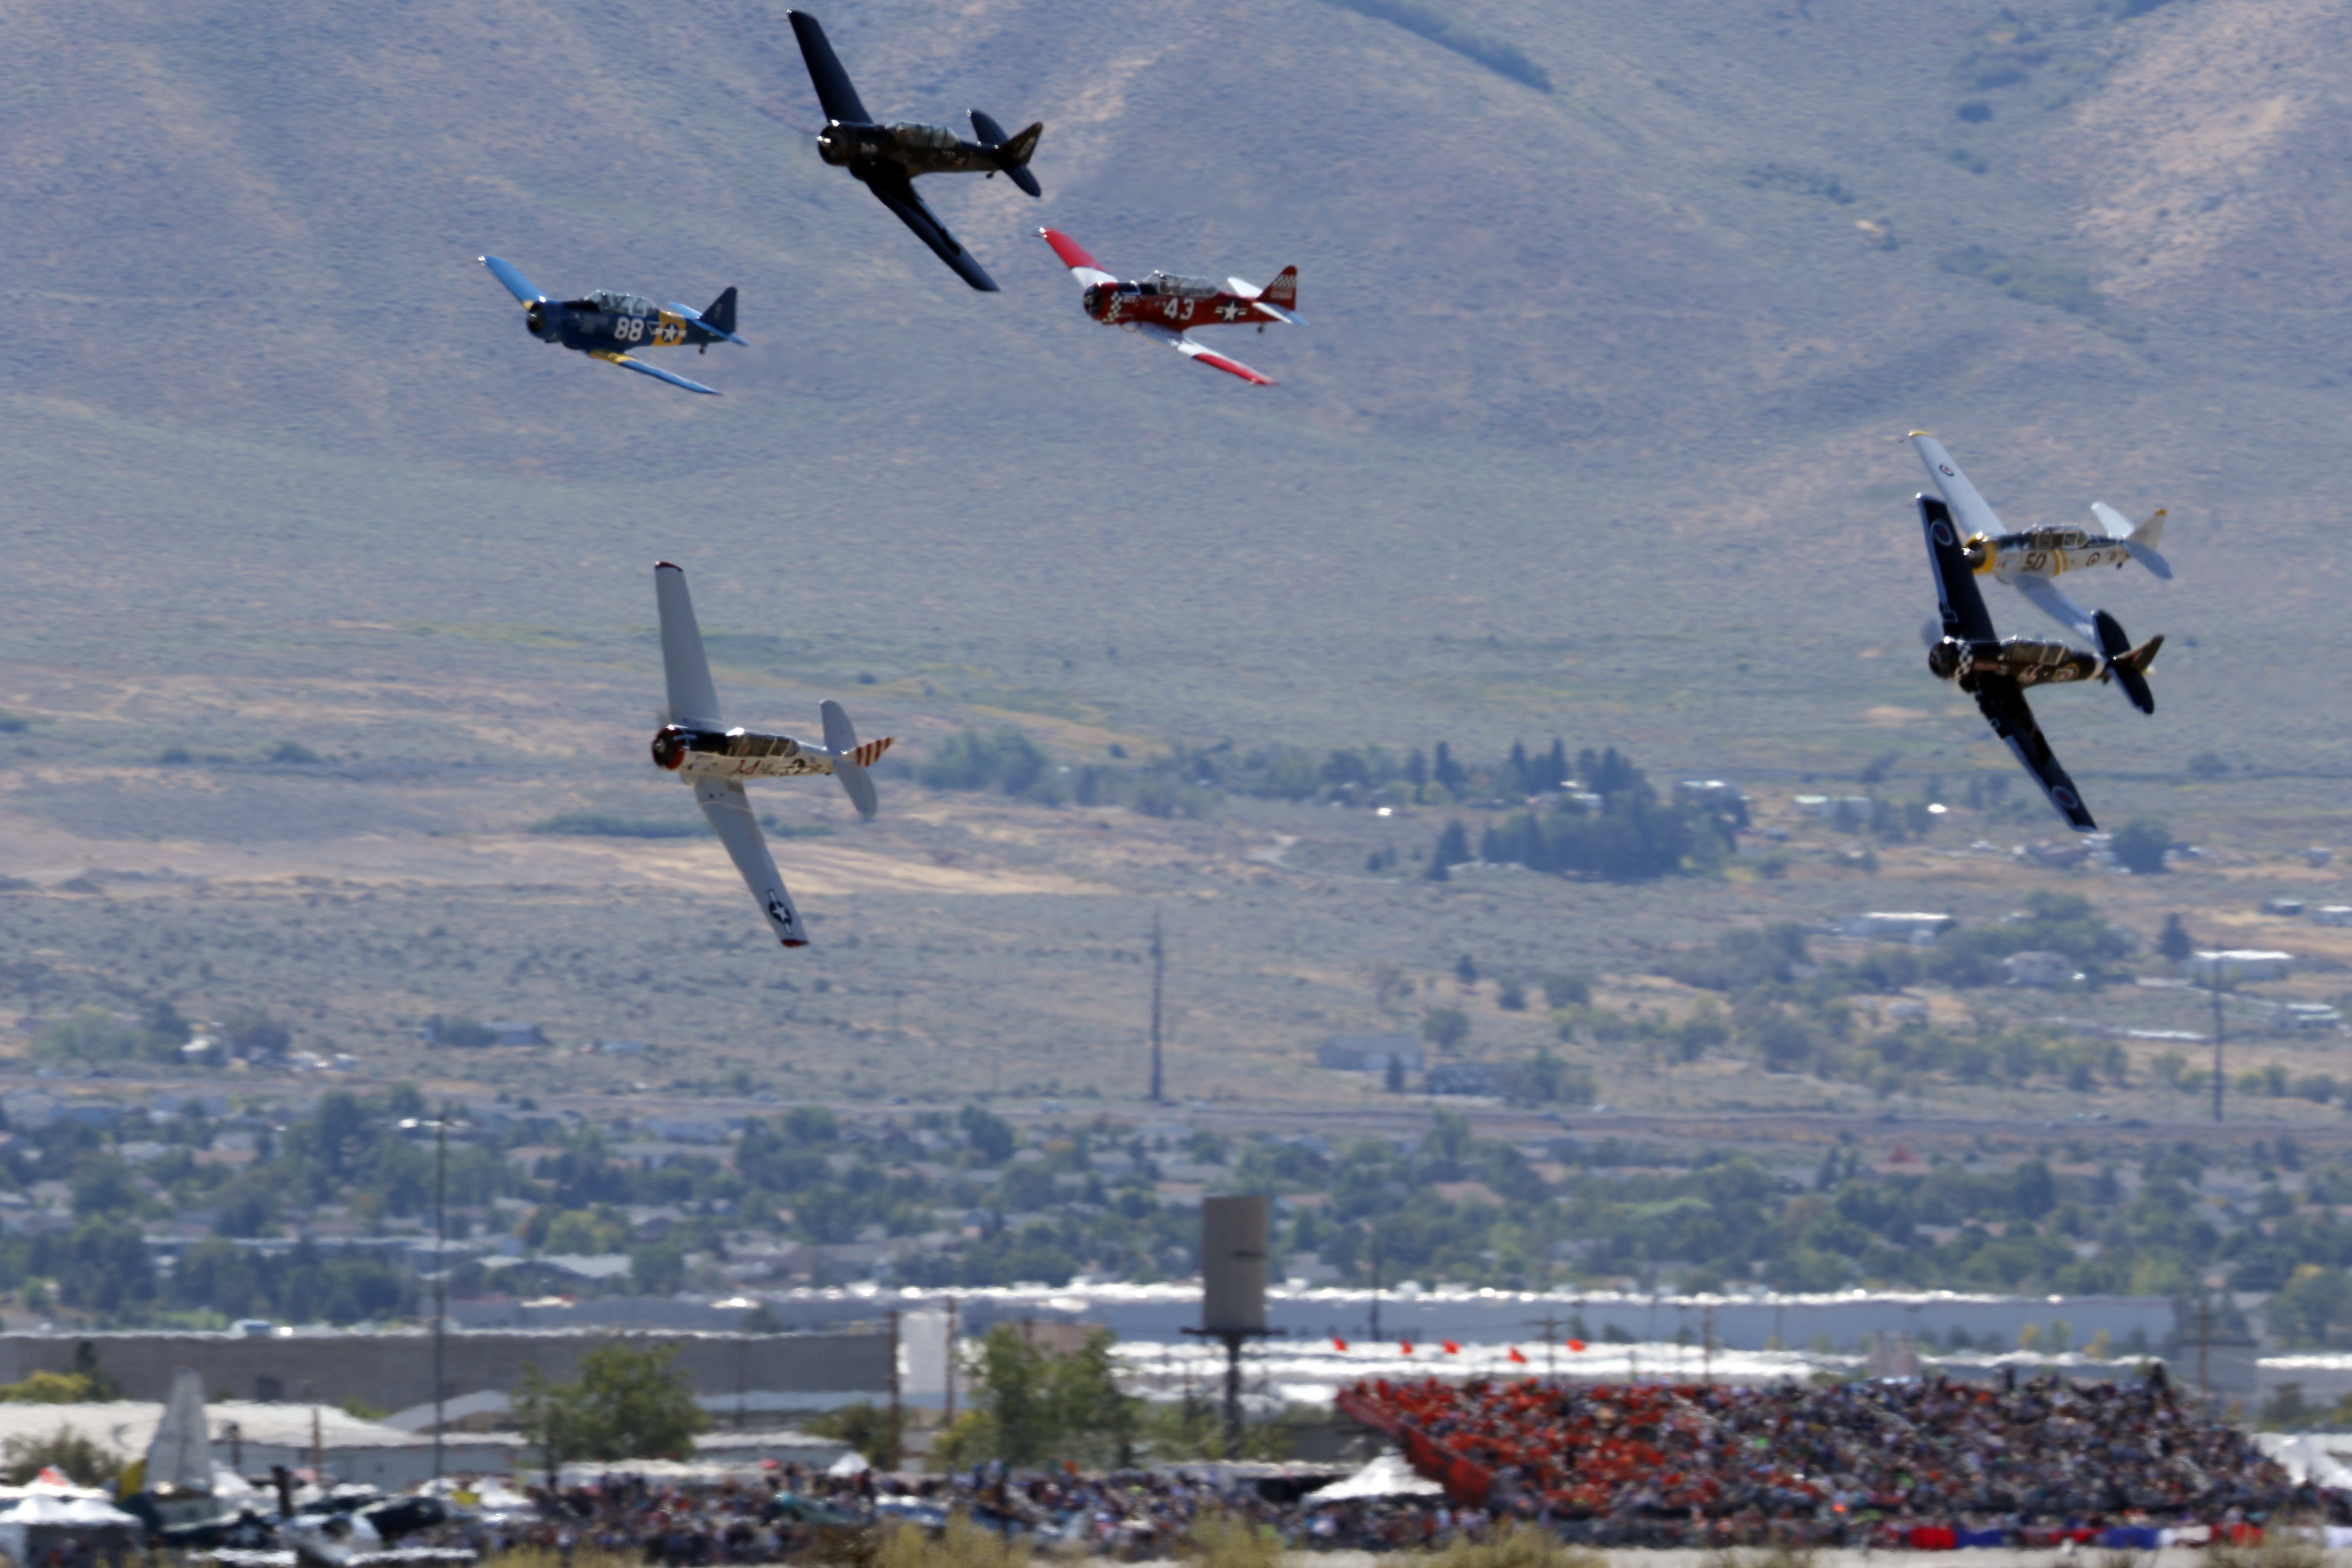 The T-6 class races past the crowd, with No. 14 AT-6B 'Baron's Revenge' flown by Chris Rushing in the lead, bottom, and Nick Macy in hot pursuit flying 'Six-Cat,' third from right, on a slightly higher line. Photo by Robert Fisher.